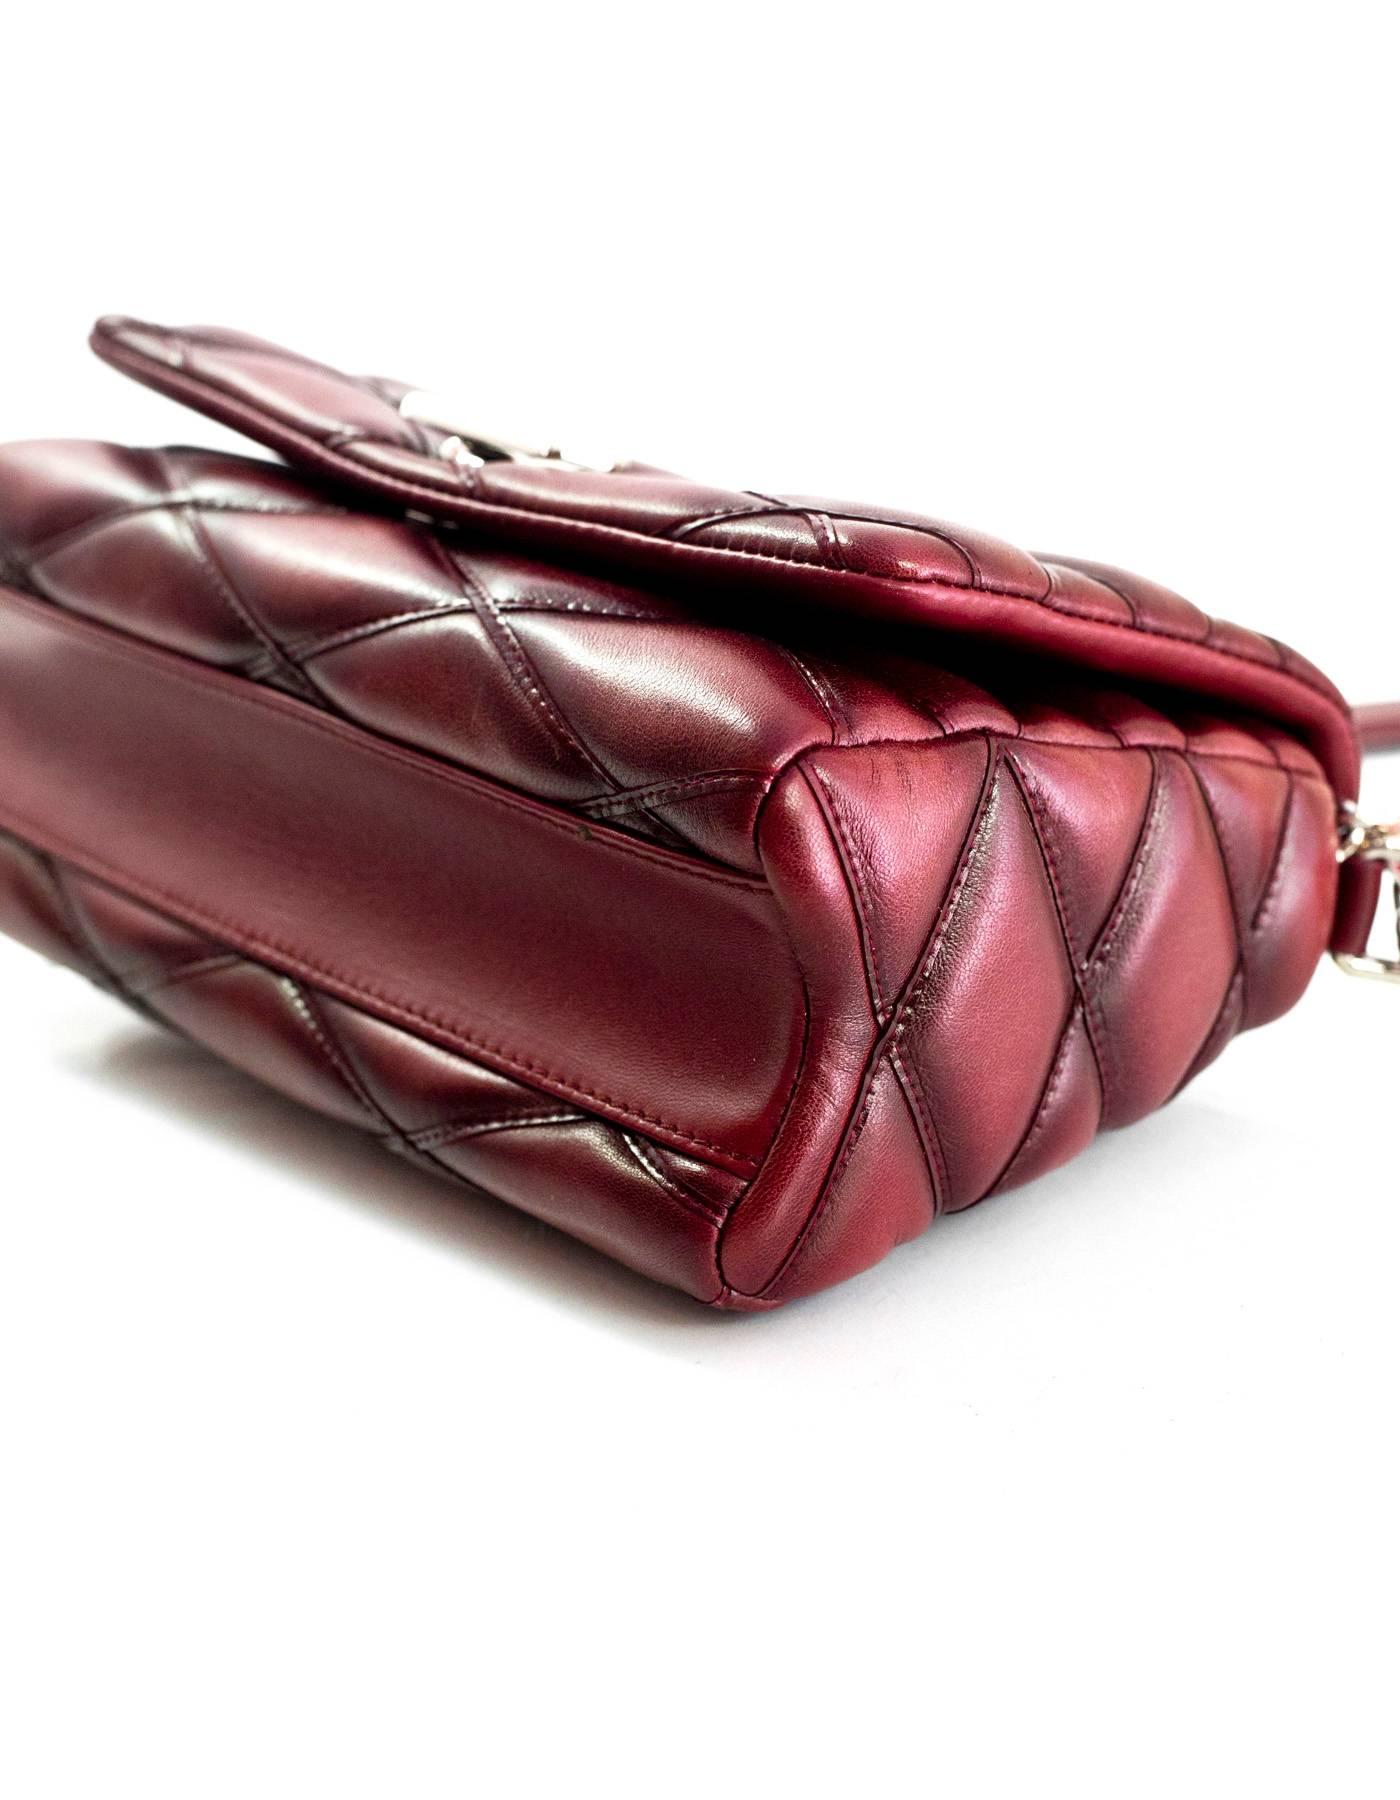 Black Louis Vuitton Burgundy Leather GO-14 Malletage PM Quilted Twist Bag rt. $3950